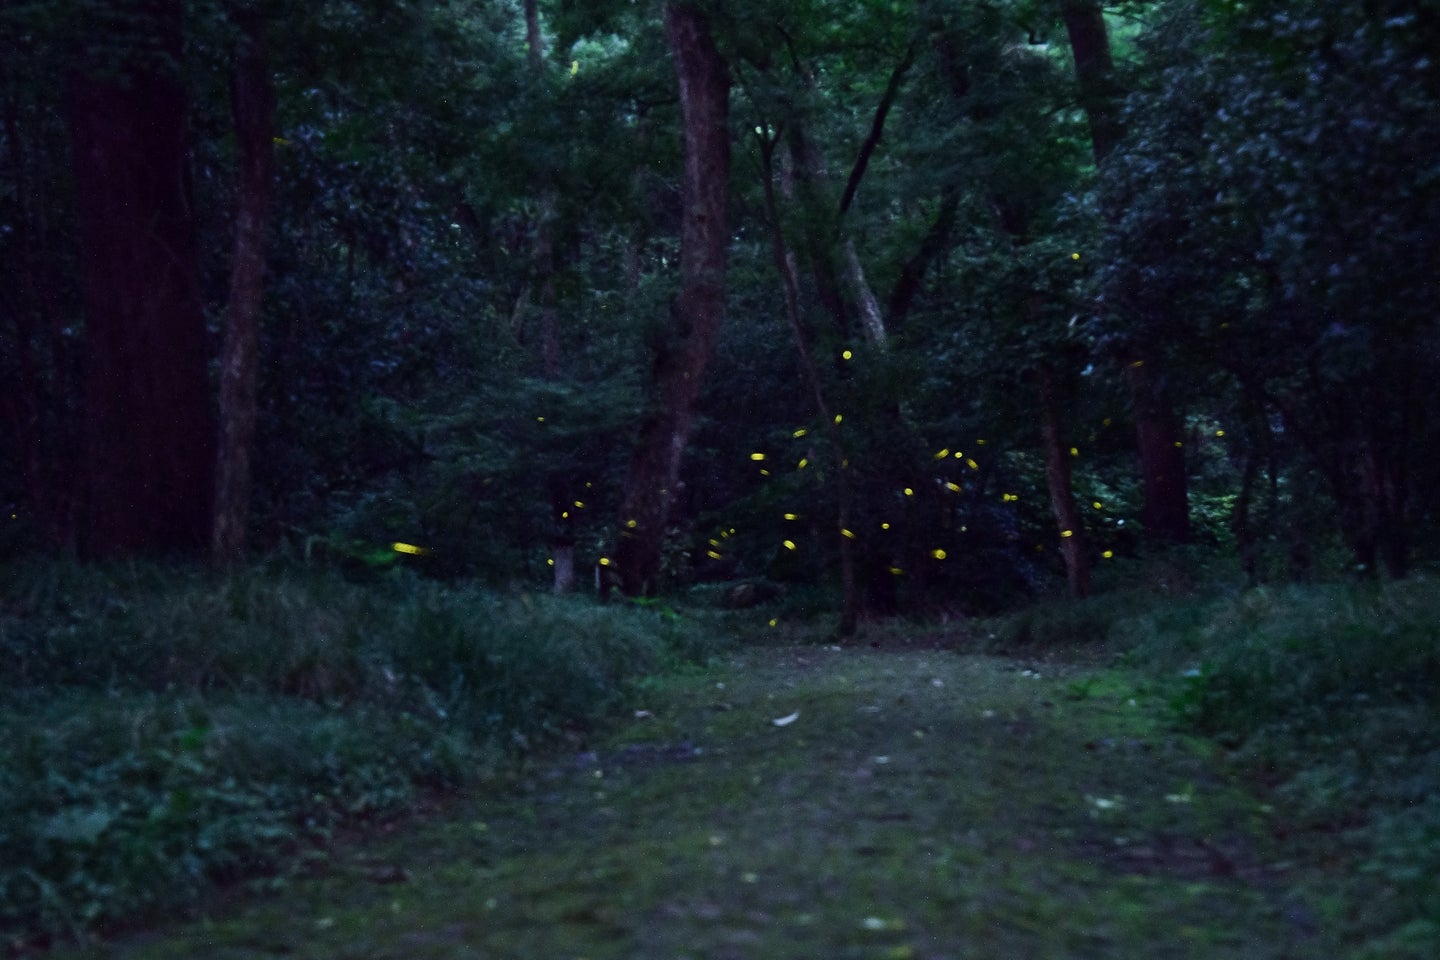 Firefly or lighting bug display in summer in a forest clearing